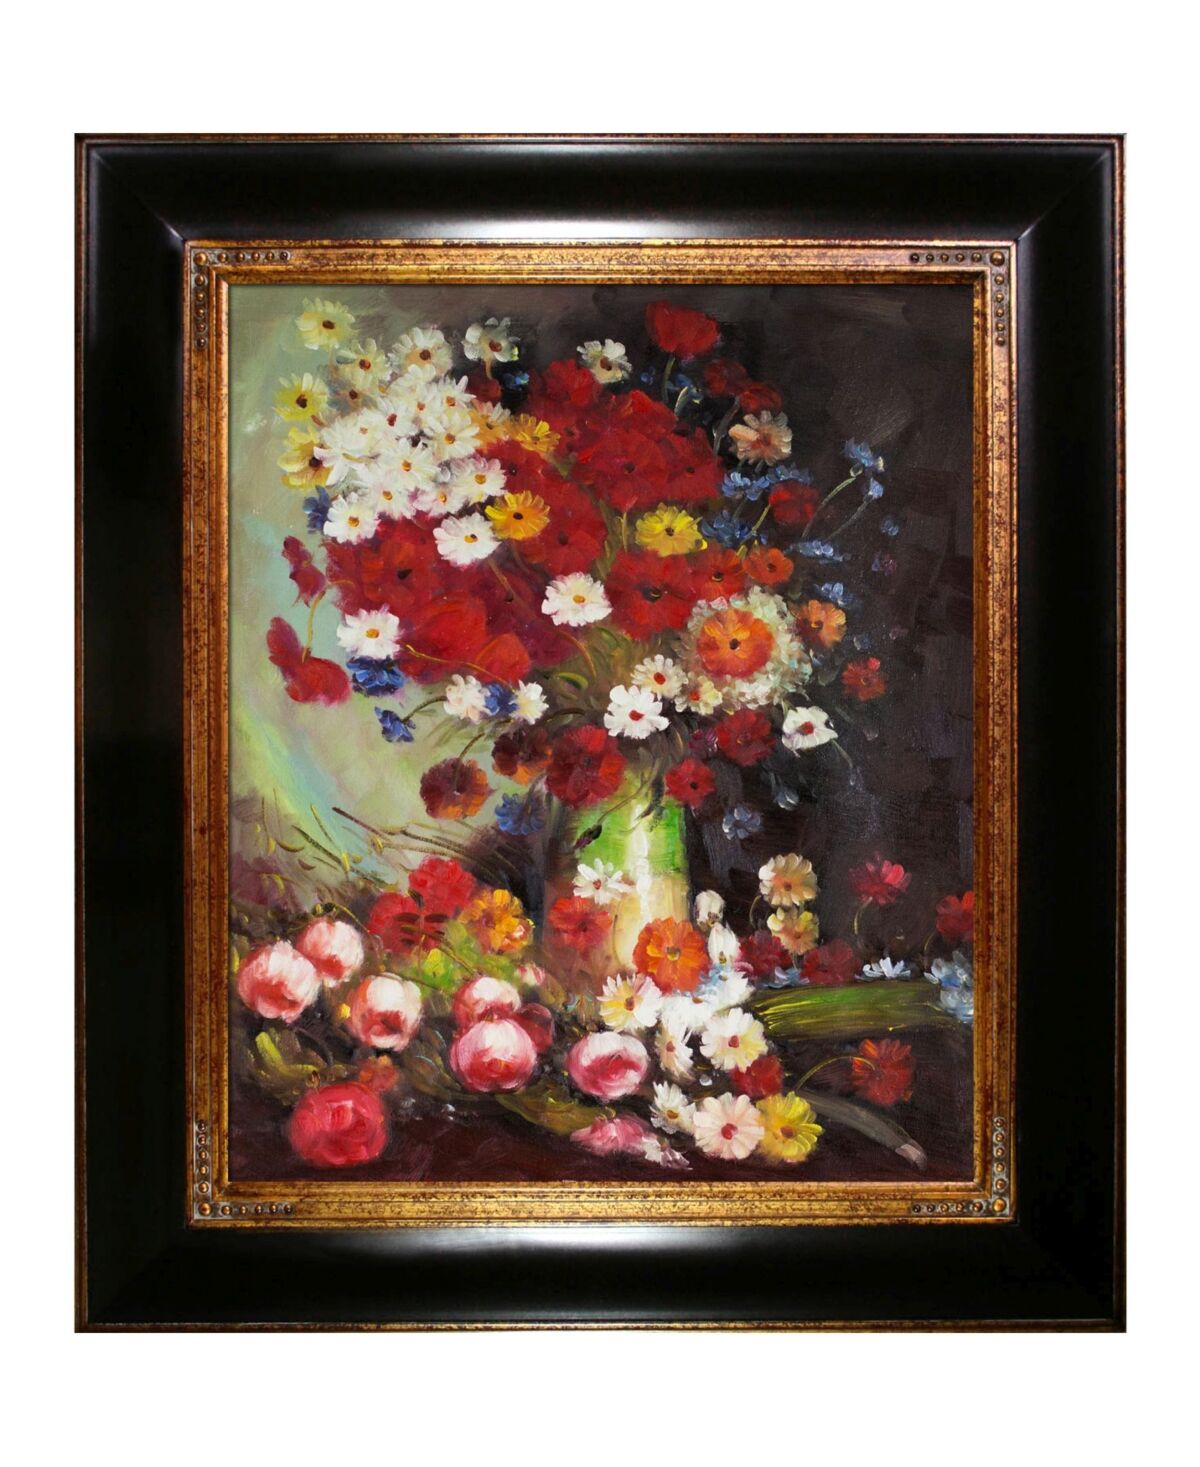 La Pastiche by Overstockart Vase with Poppies Cornflowers Peonies and Chrysanthemums by Vincent Van Gogh with Wood, Opulent Frame Oil Painting Wall Ar